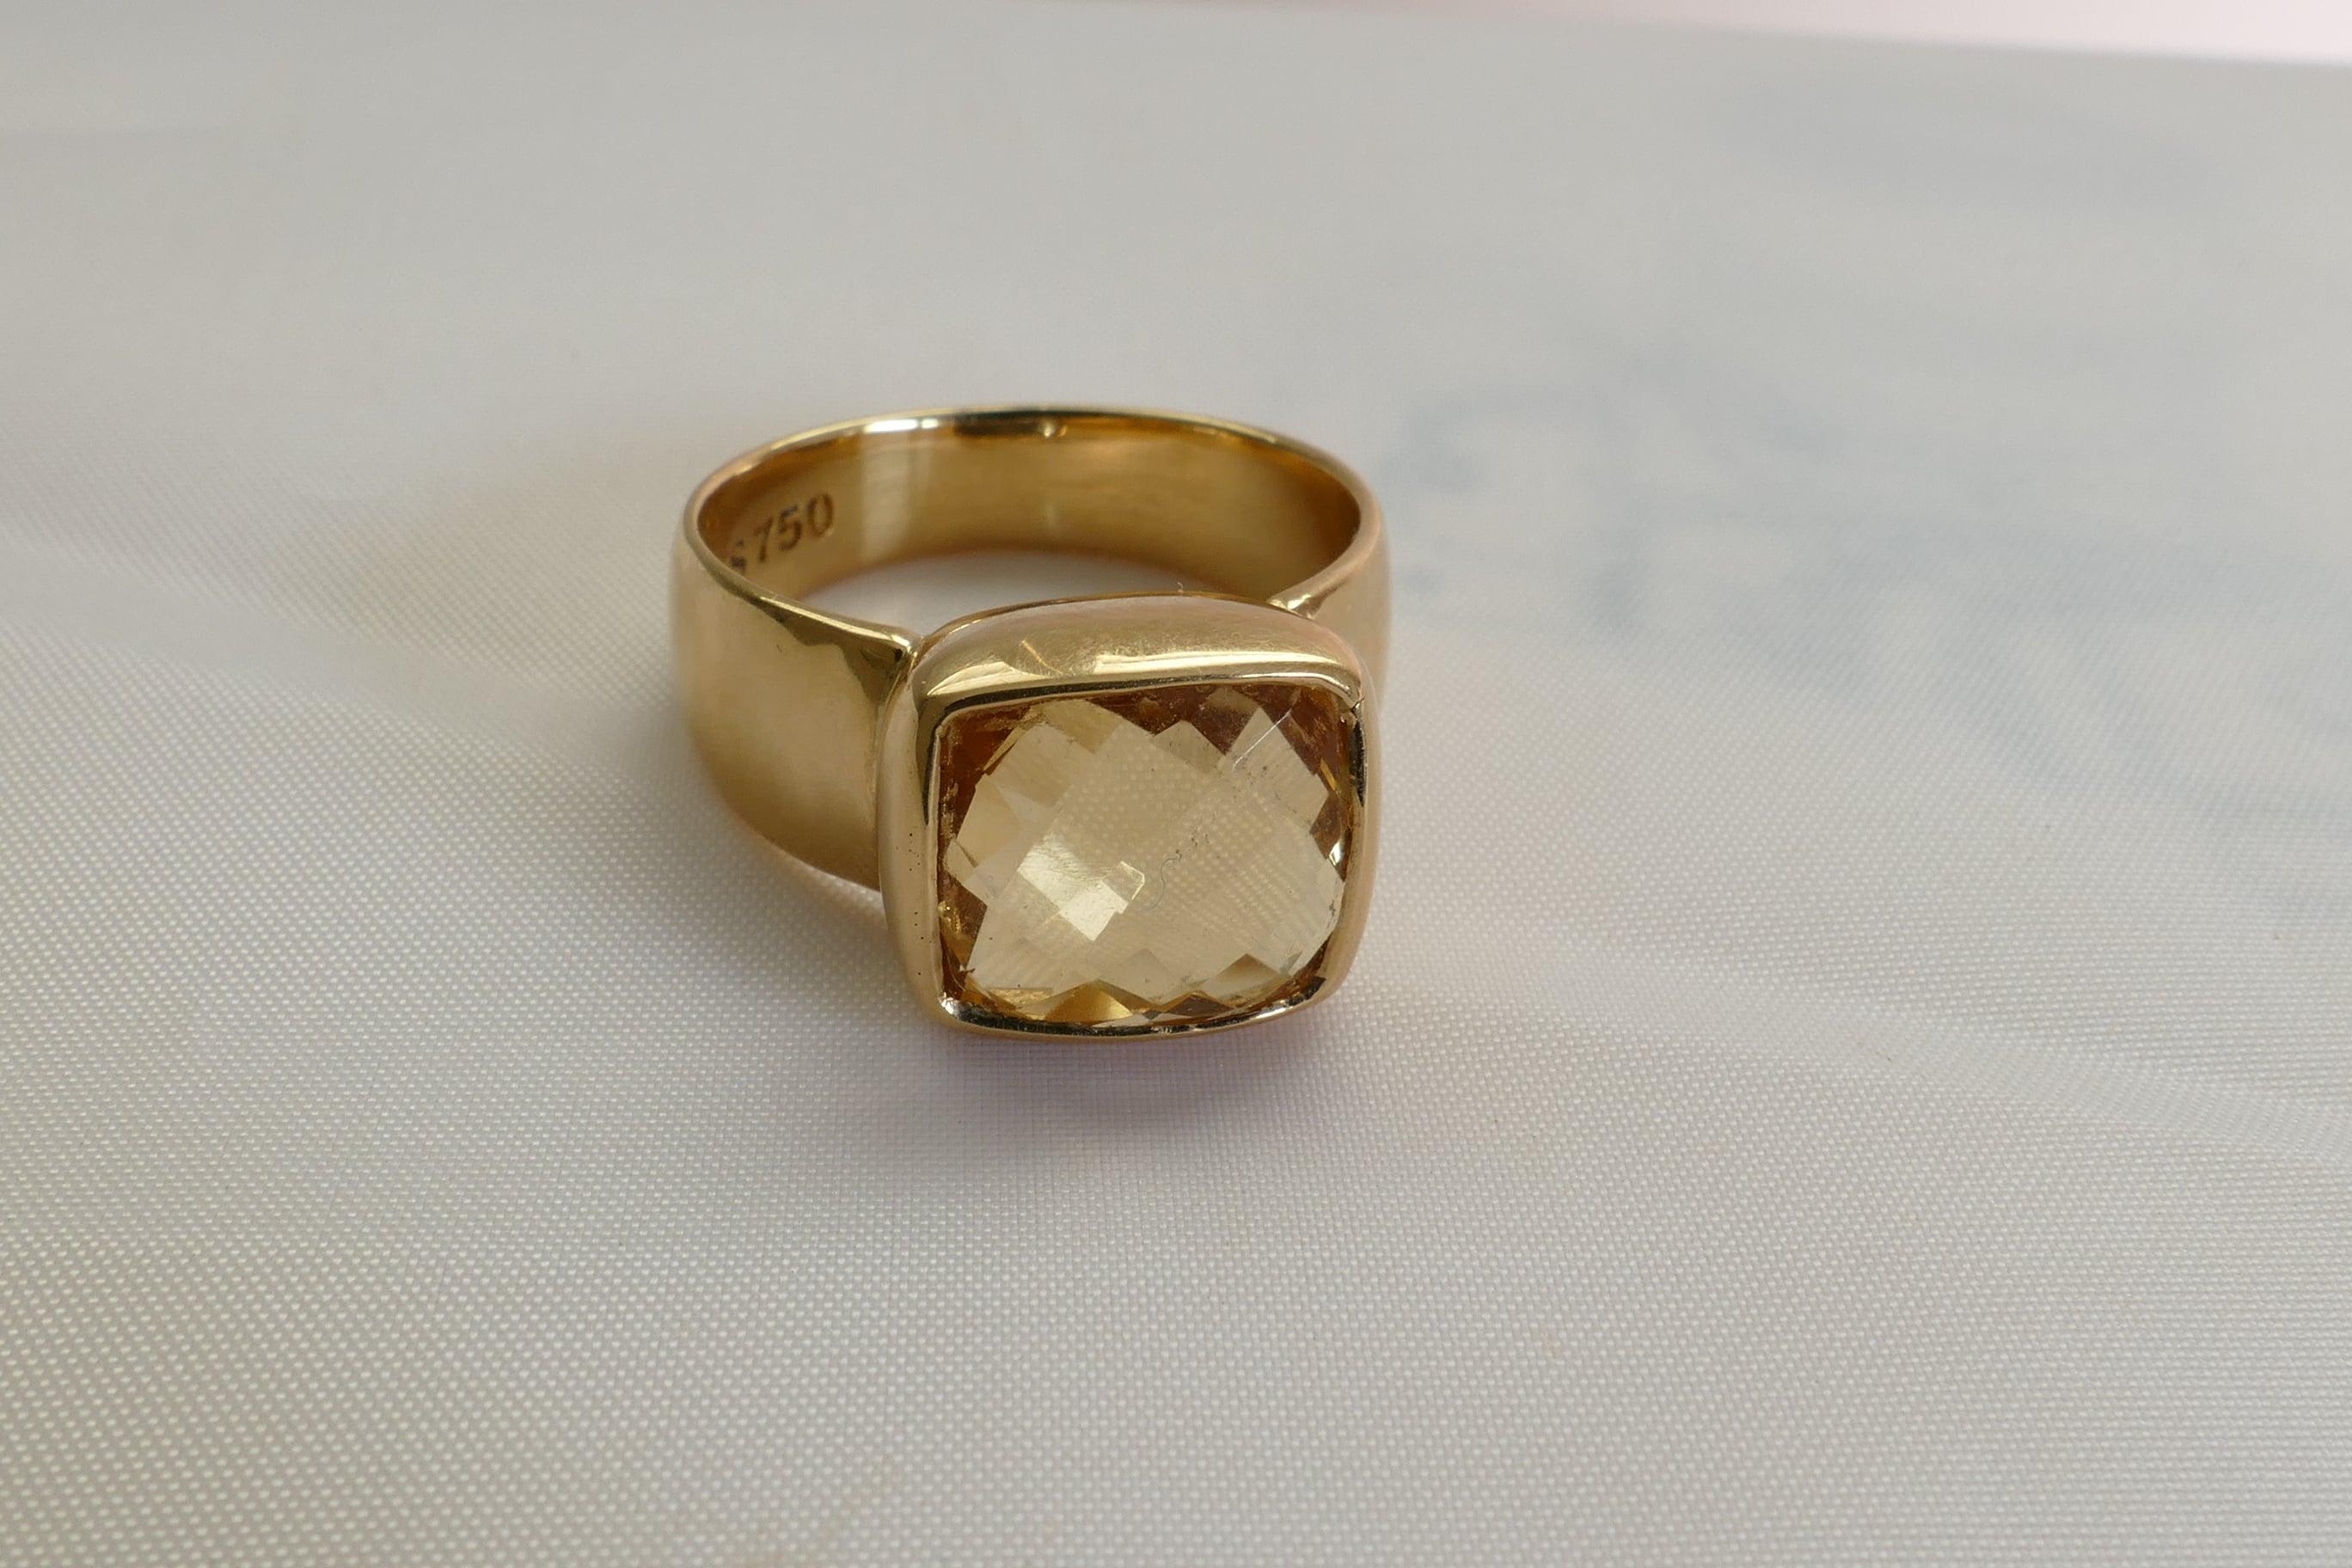 The Citrine Ring is Chequerboard Bezel set and has been manufactured by Dracakis.
The Stone is eye clean and a clear yellow in Colour.
The Band is polished, half round slightly reverse tapered and measures 5.14mm wide at the base of the Shank,